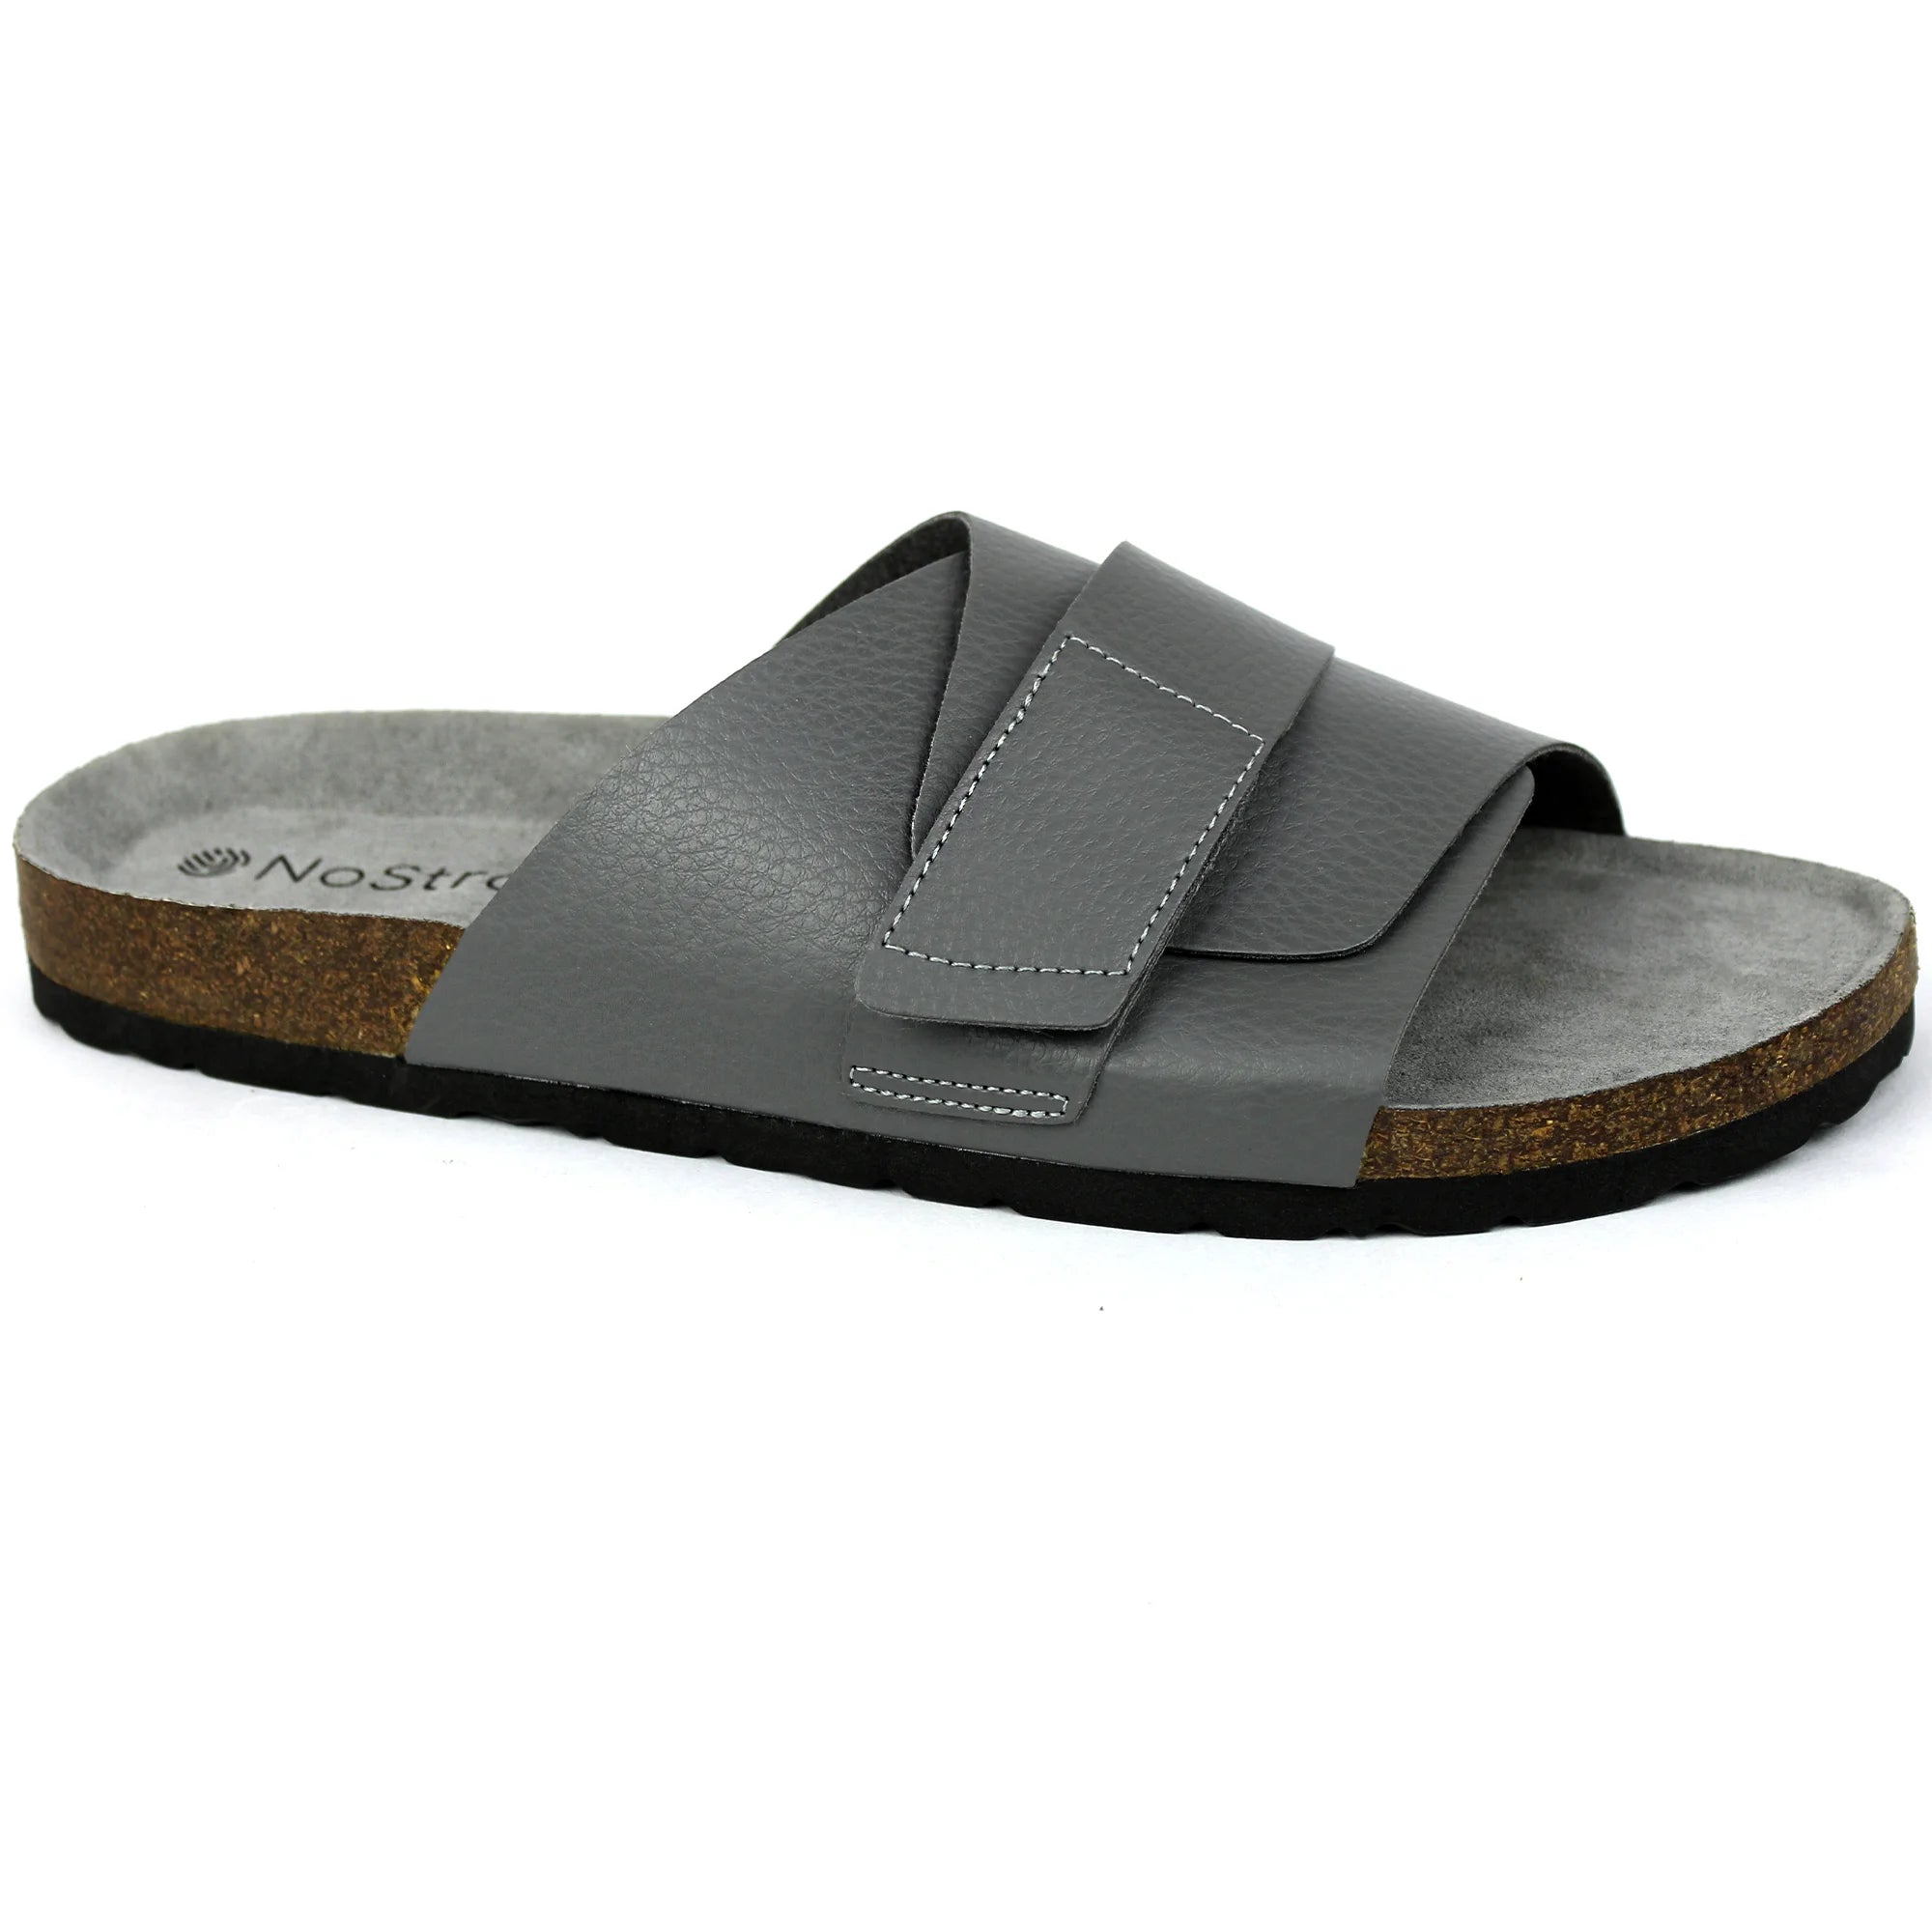 Branded grey cork sandals for daily use premium vegan leather upper